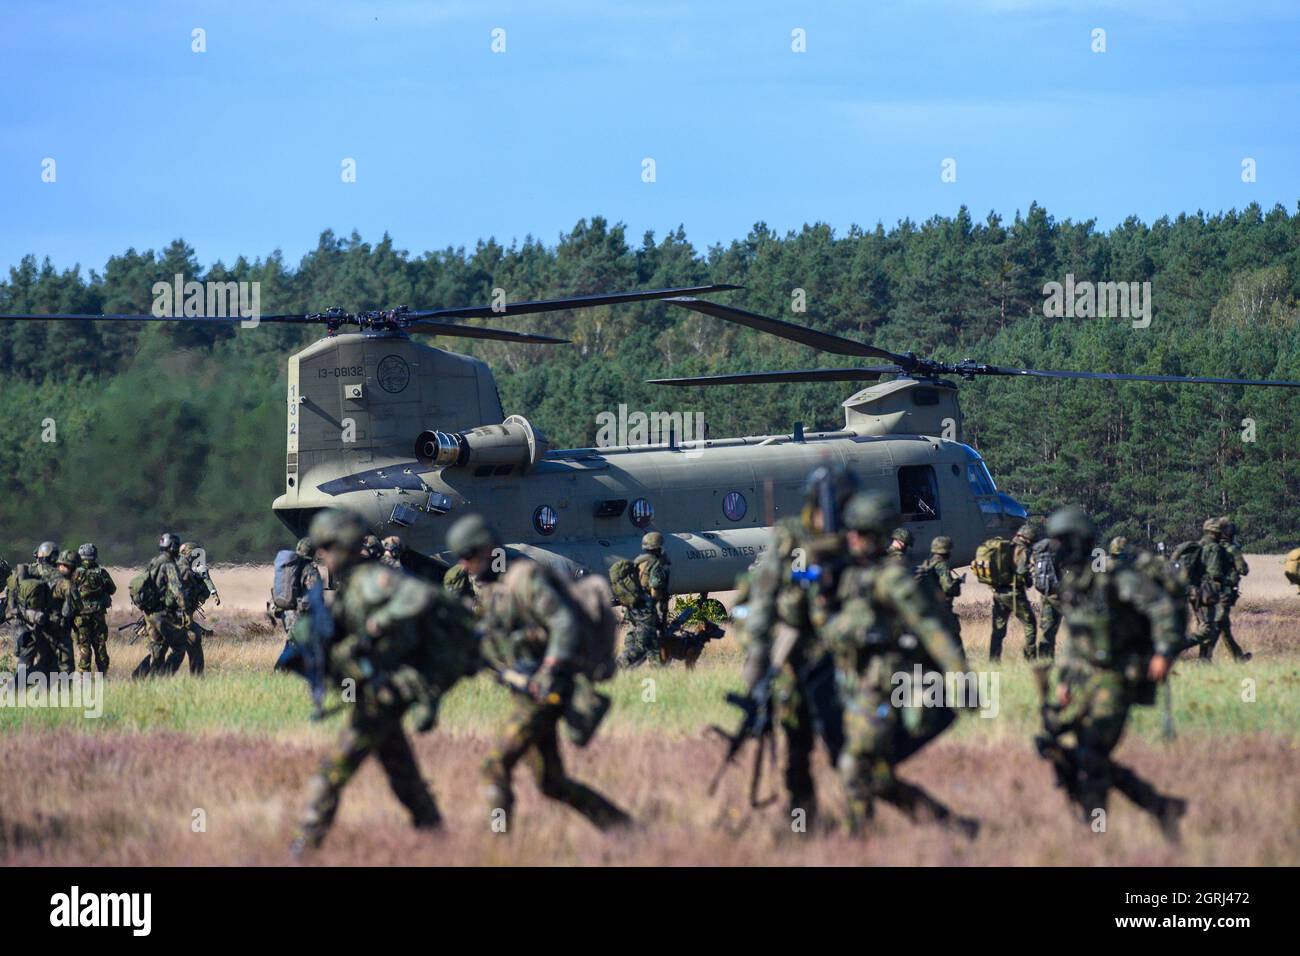 01 October 2021, Saxony-Anhalt, Klietz: Soldiers of the Falschirmjäger Regiment 26 belonging to the 'Division Schnelle Kräfte' (DSK) leave a Chinook C-47 helicopter of the U.S. Army, while other Falschirmjäger enter the helicopter. With the exercise 'Green Griffin 21', the DSK has been training combat operations within the framework of national and alliance defense since 27 September 2021 at the military training areas in Klietz, Altengrabow, Lehnin and Stendal and at the Training and Exercise Center Air Mobility in Celle. In addition to the German paratroopers, Dutch soldiers and troops from Stock Photo